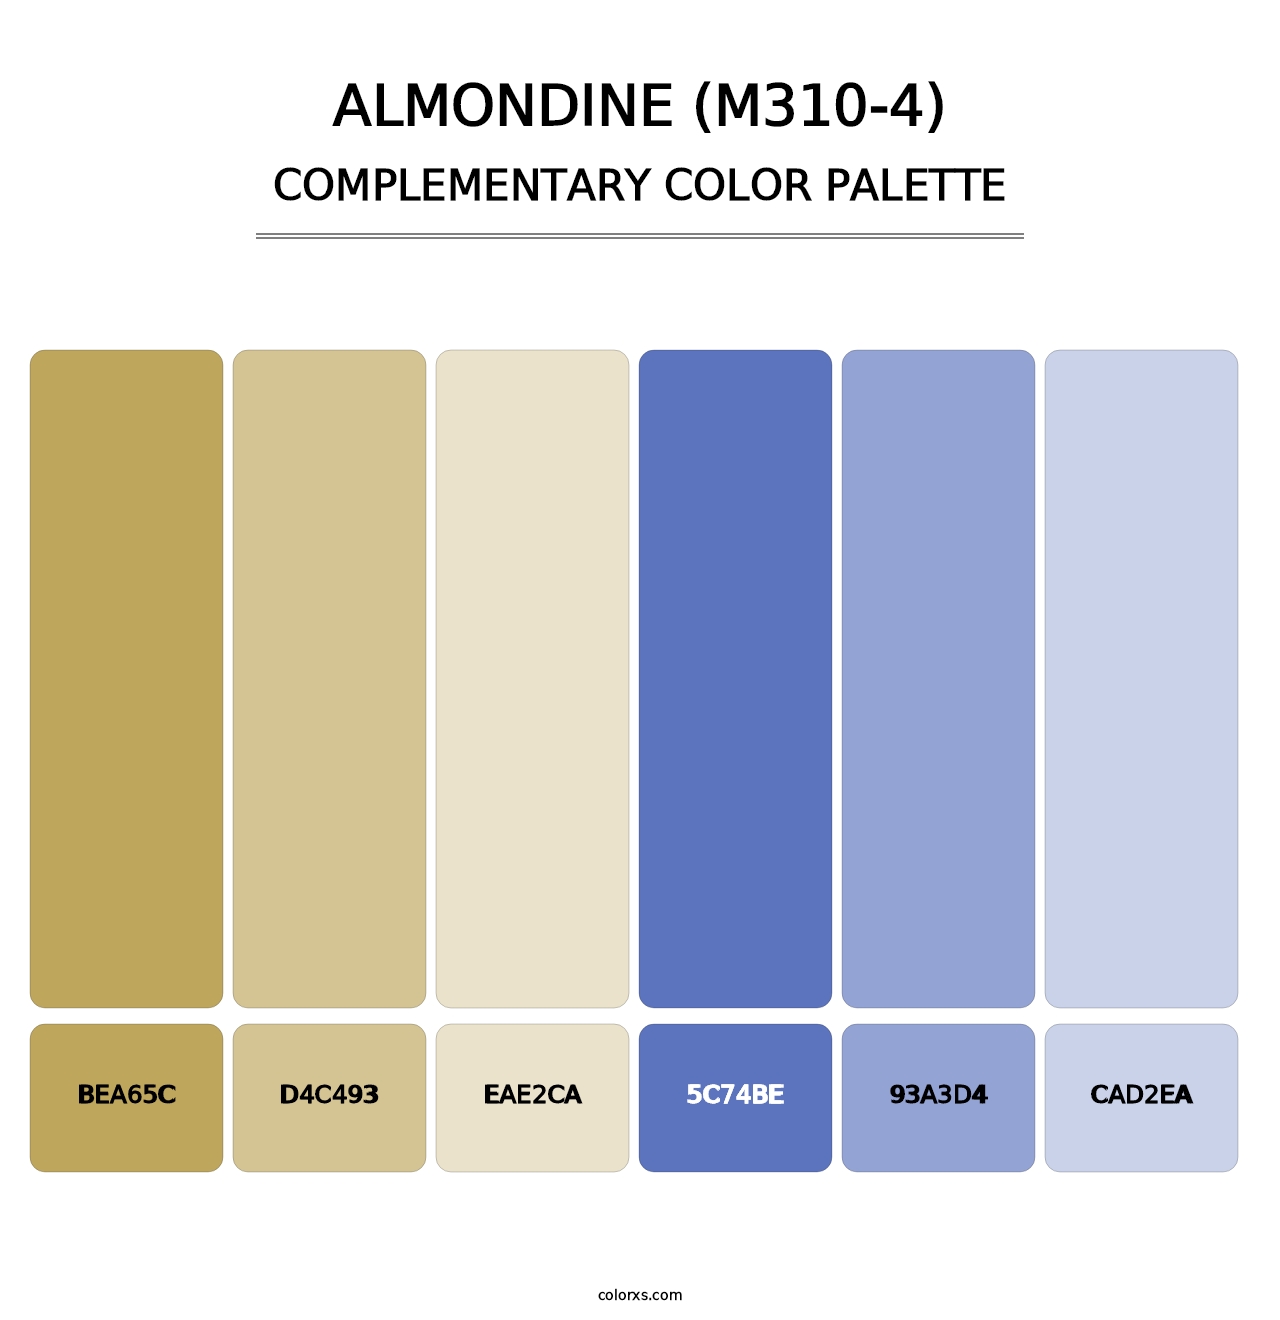 Almondine (M310-4) - Complementary Color Palette